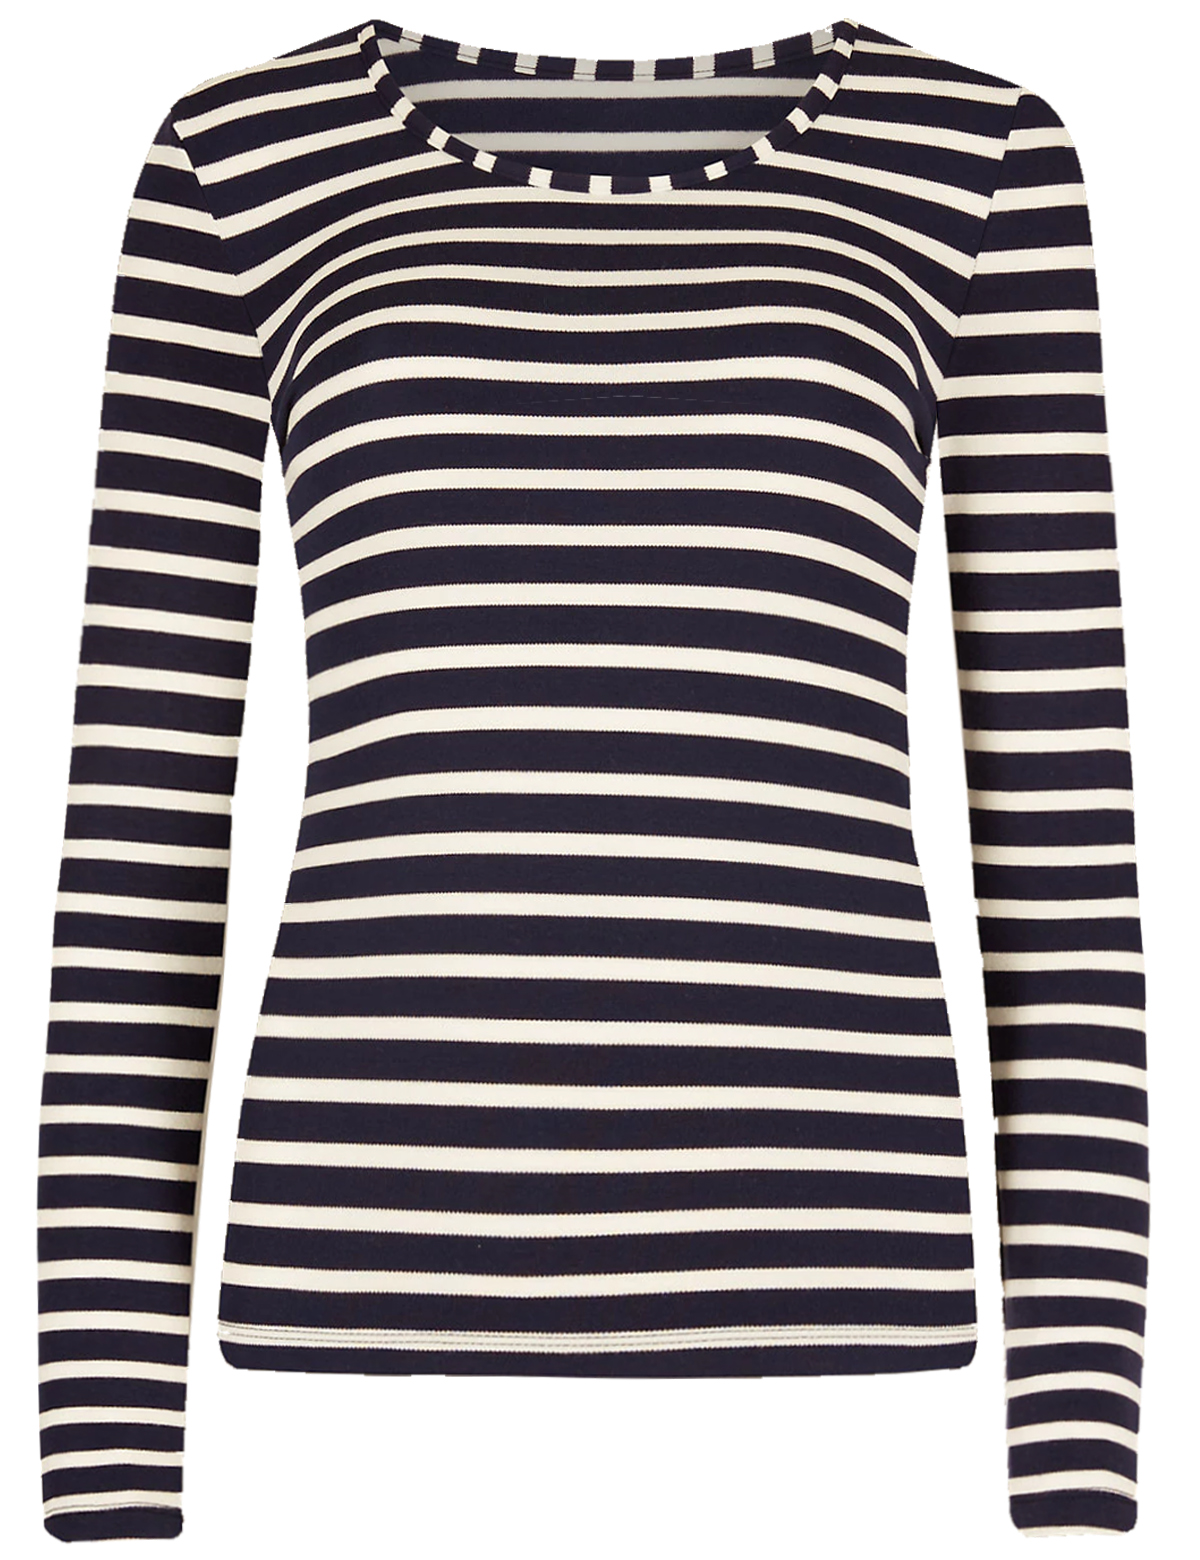 Marks and Spencer - - M&5 NAVY Striped Brushed HeatGen PLUS Thermal ...